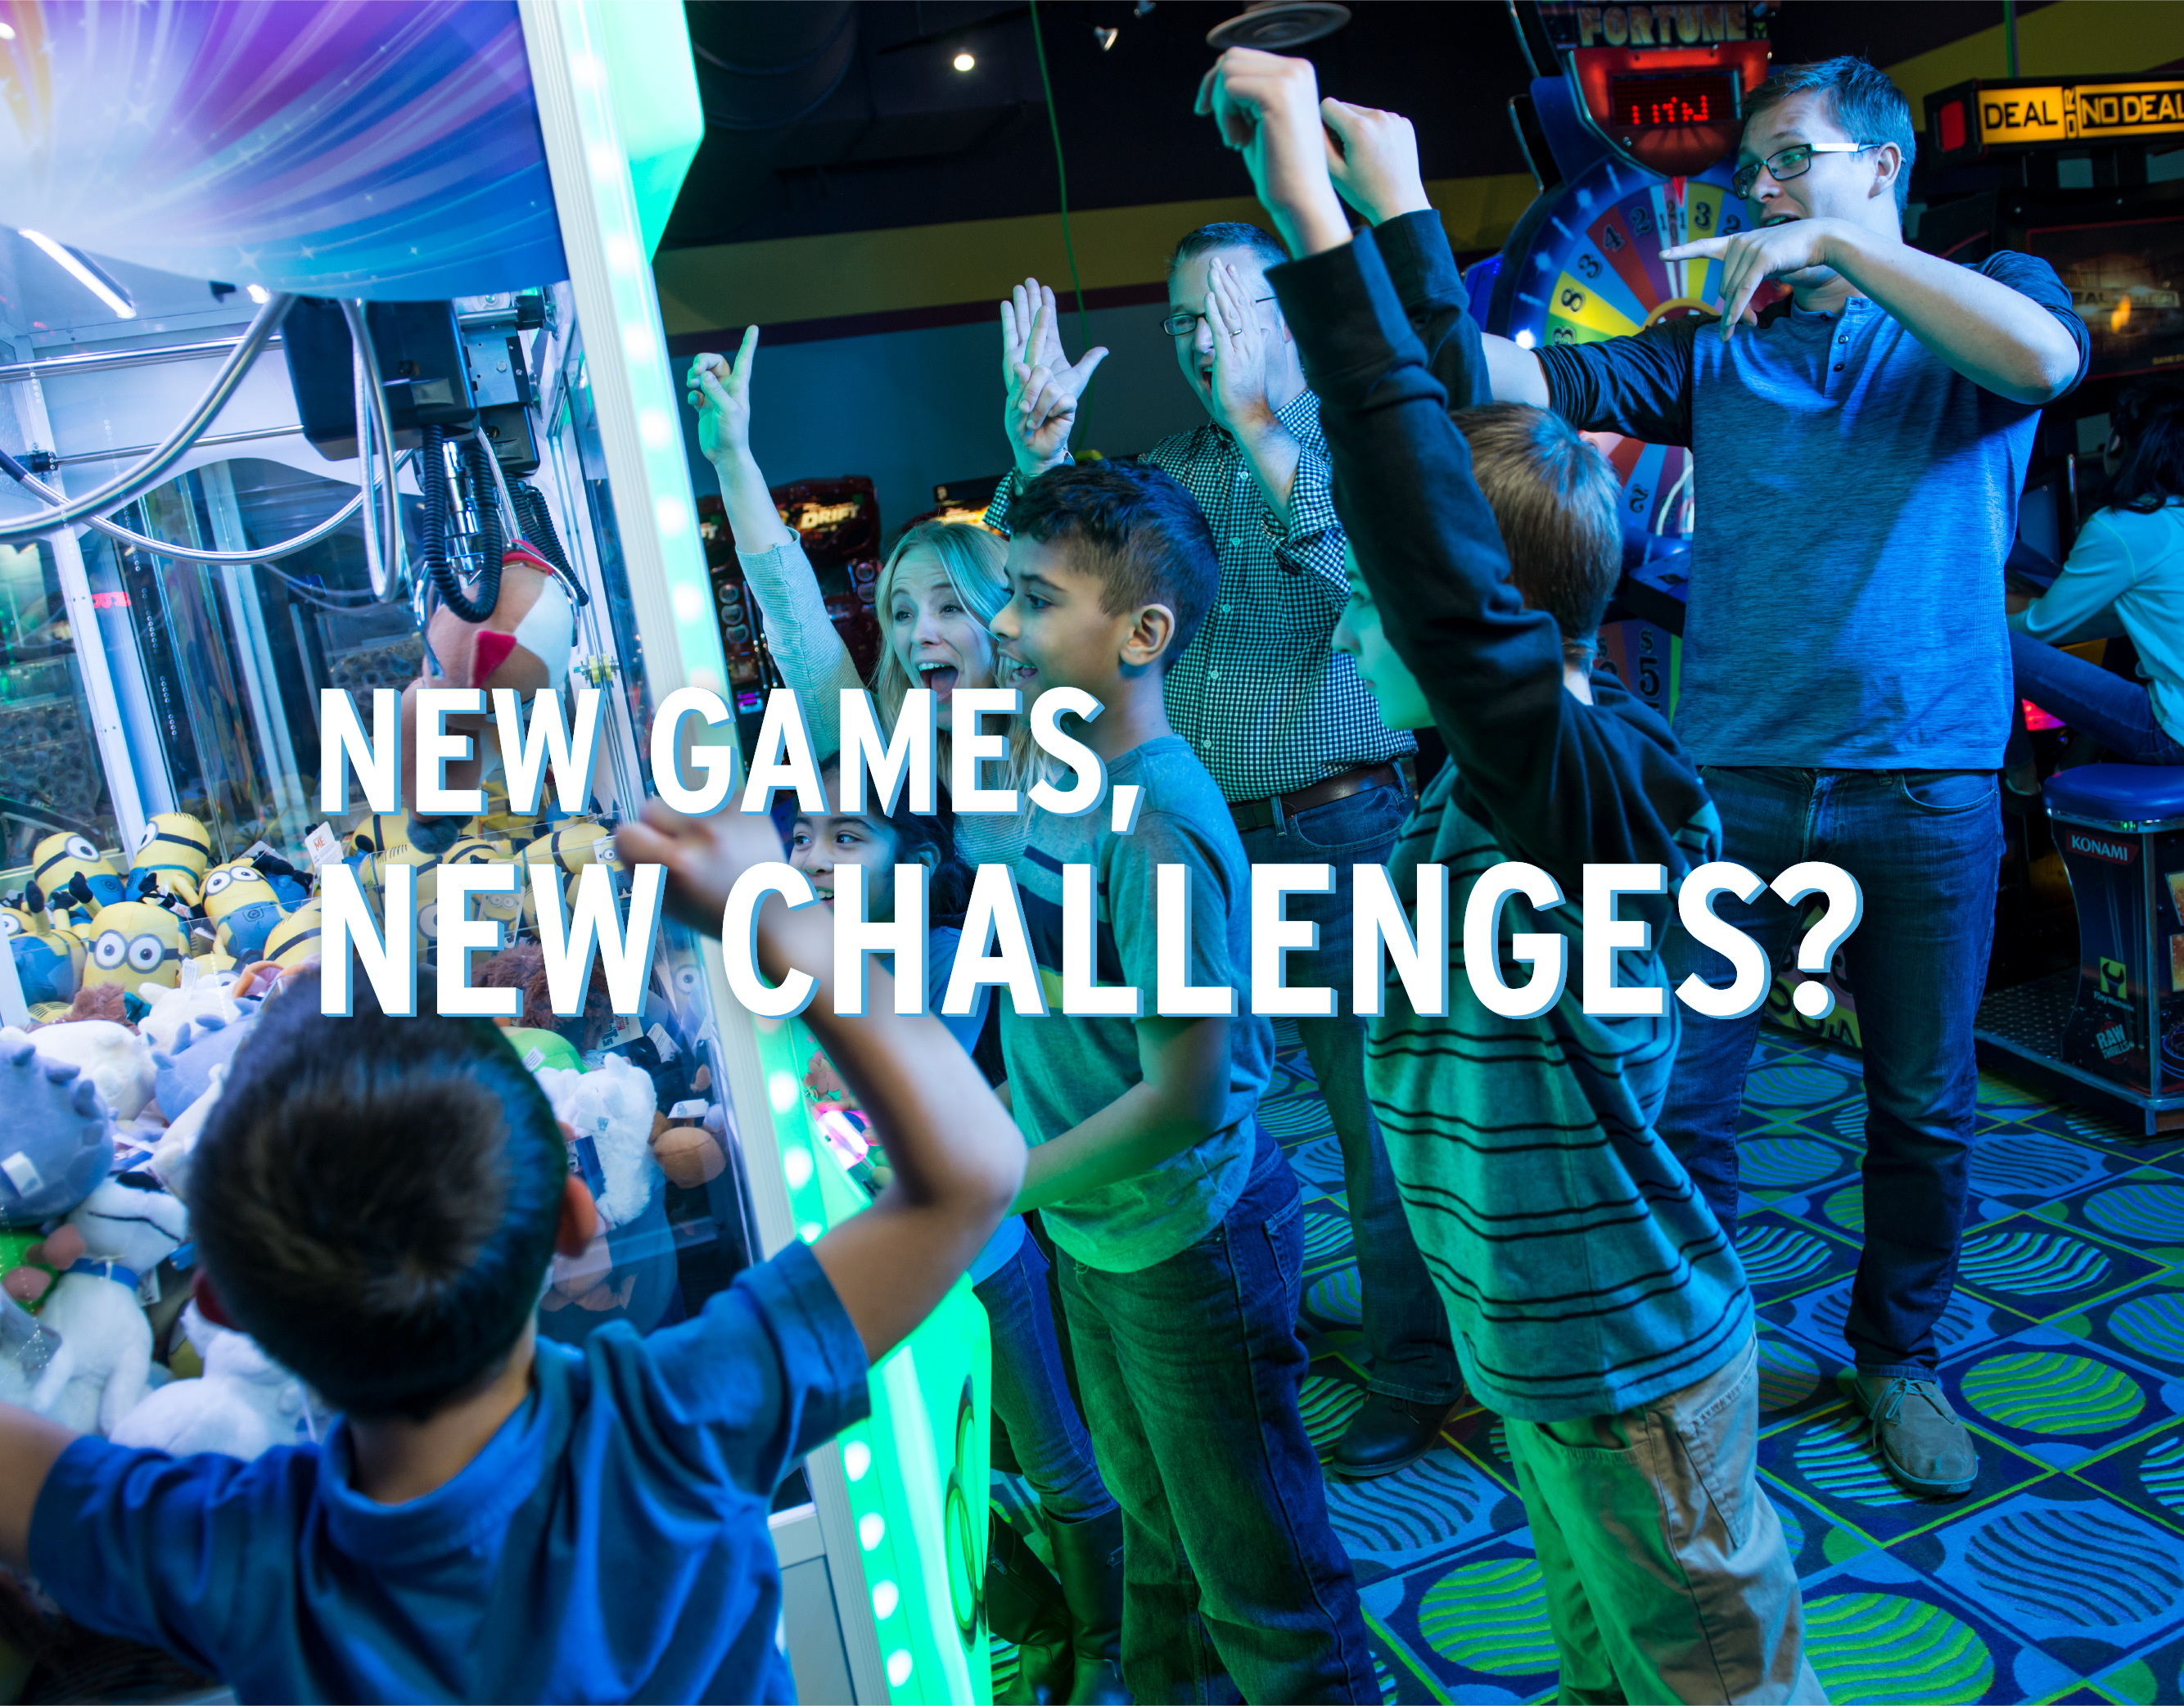 New Games, New Challenges